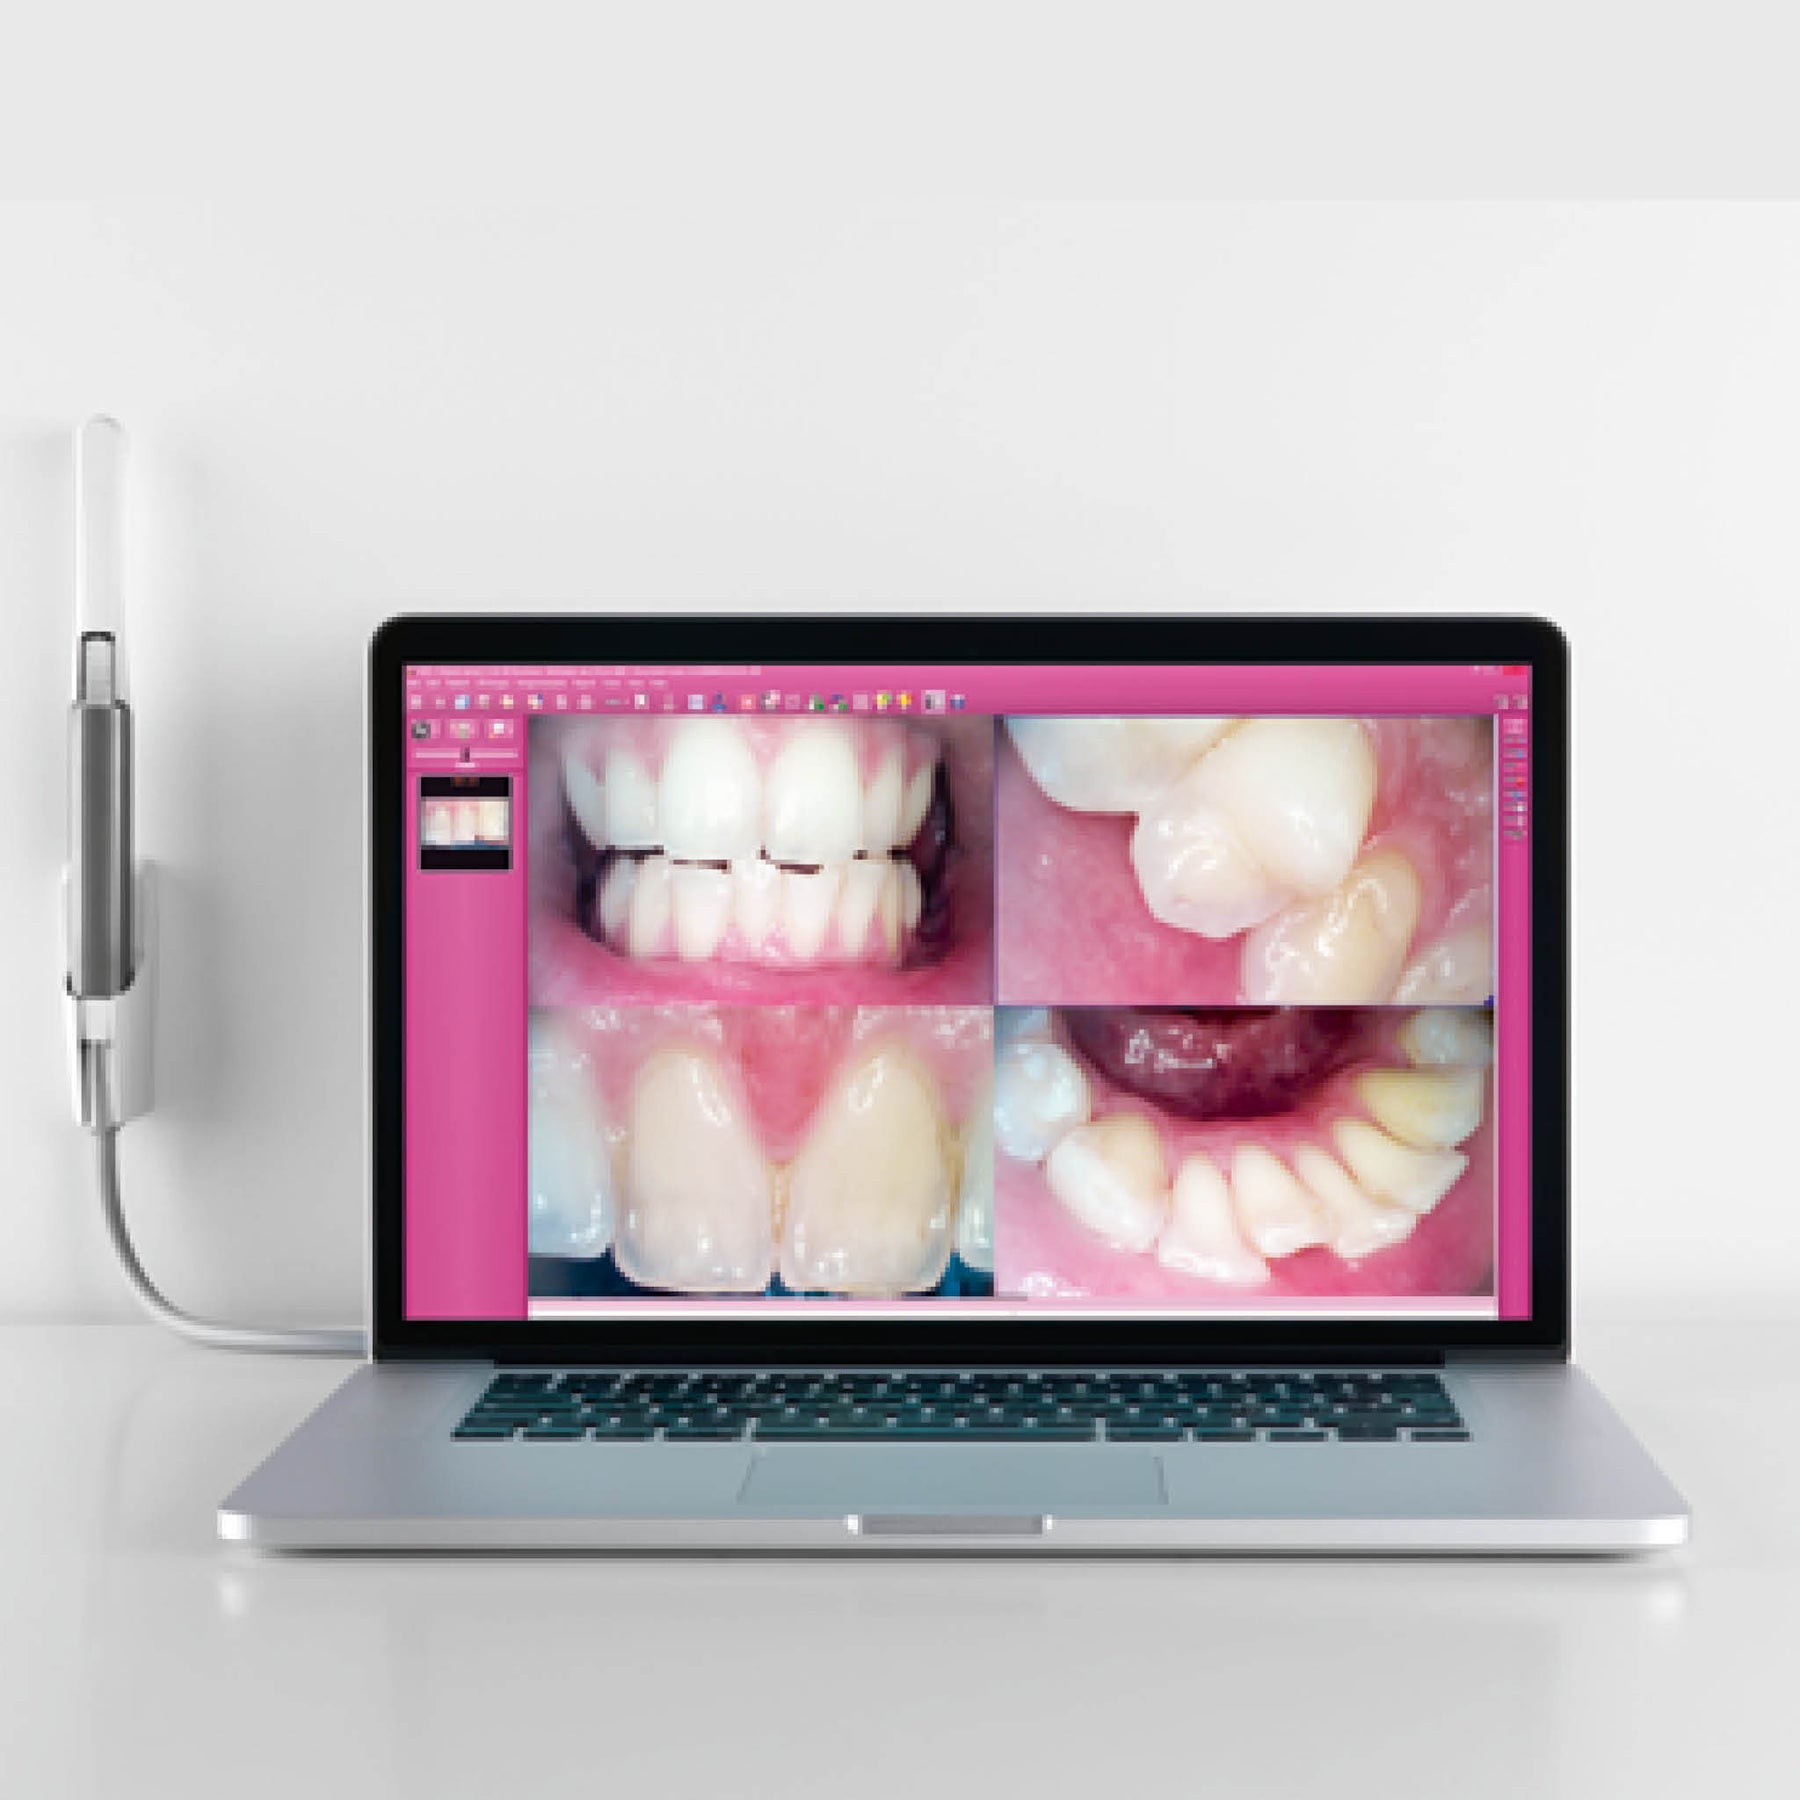 MyRay C-U2 Intraoral Camera with Laptop showing patient mouth and teeth images